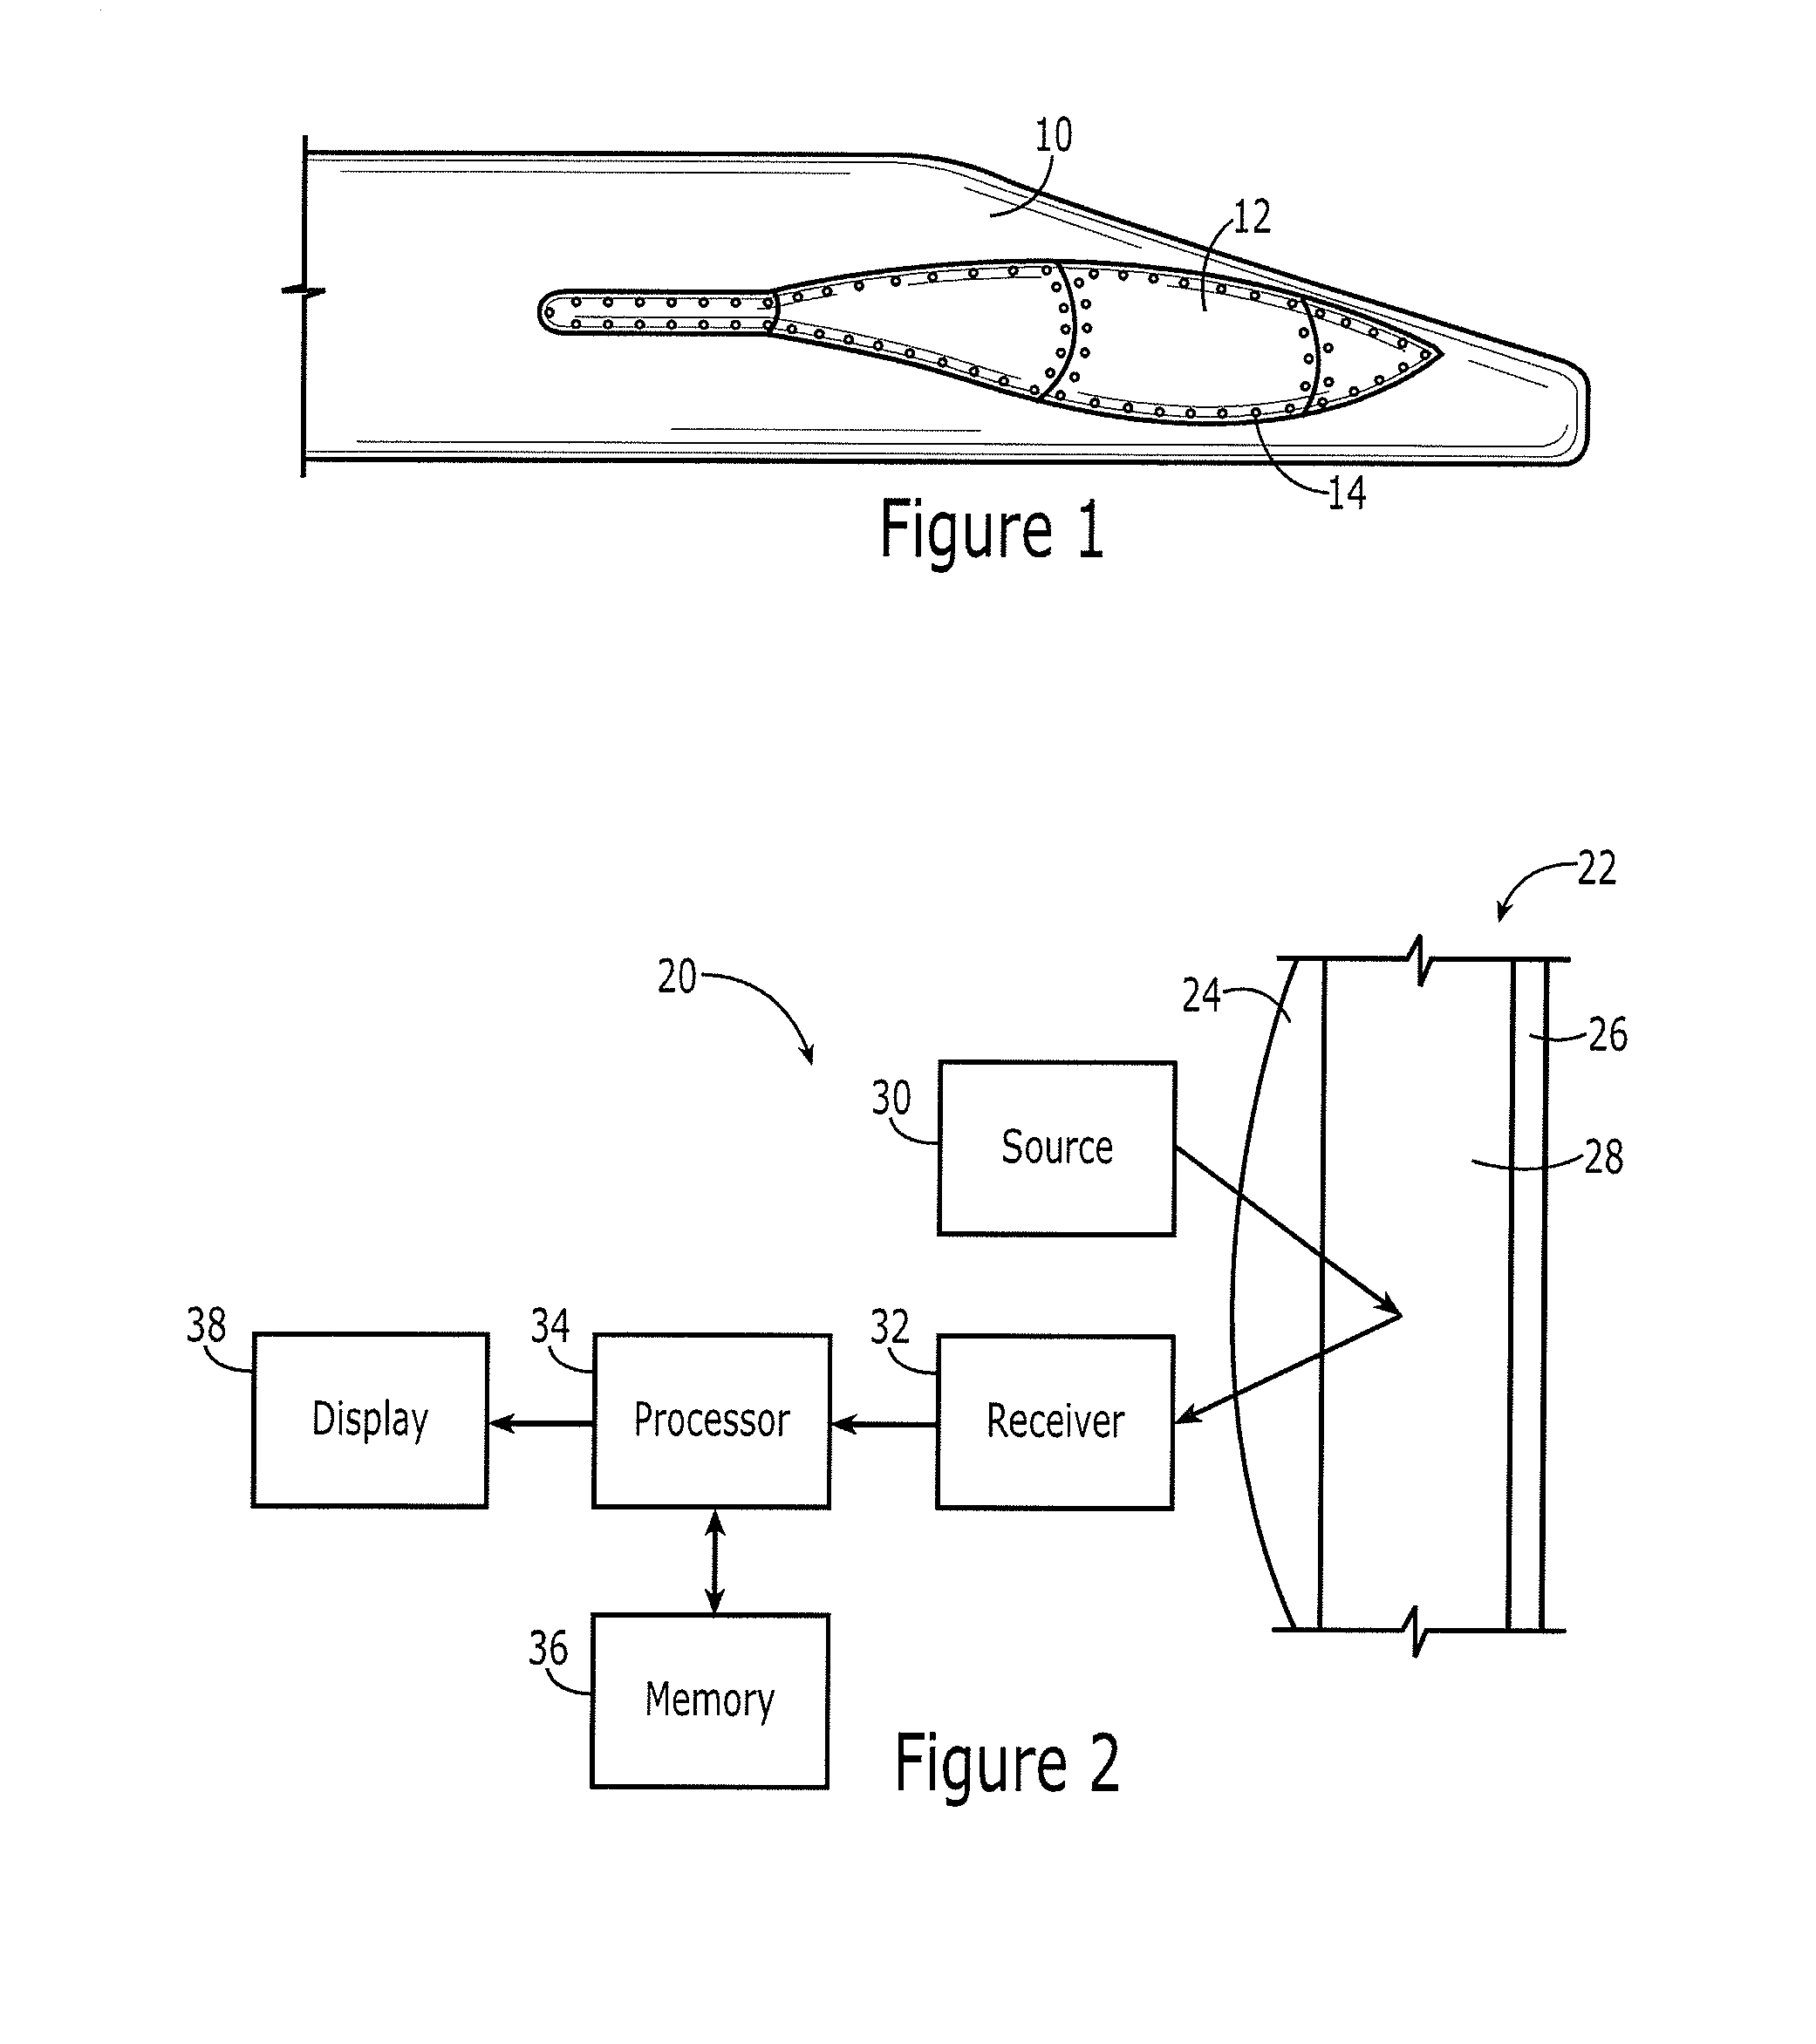 Method and system for non-destructively evaluating a hidden workpiece